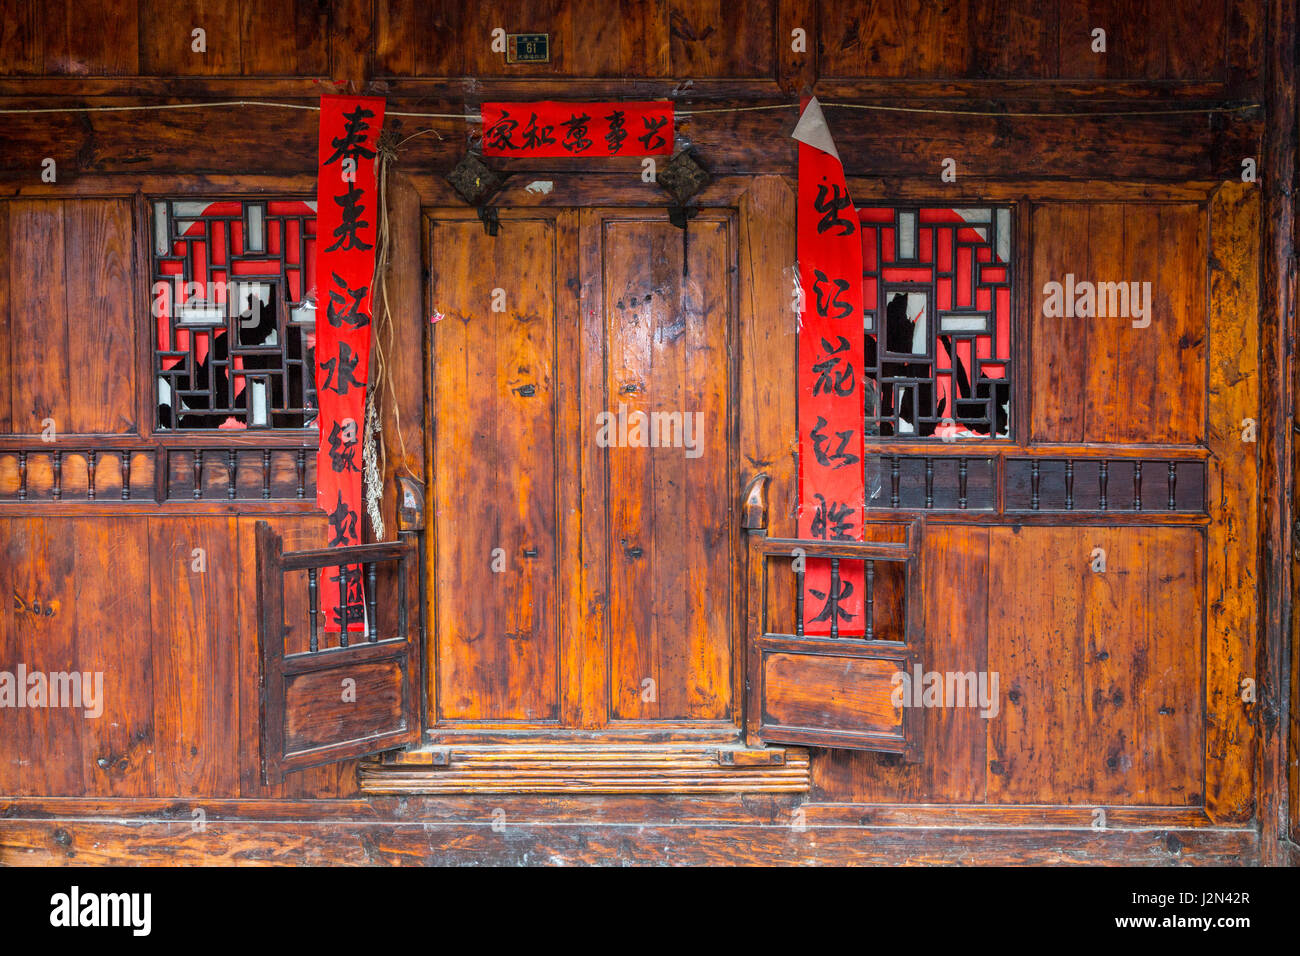 Matang, a Gejia Village in Guizhou, China.  Doorway to Private Home with Spring Festival (New Year) Scrolls Quoting Poetry by Bai Juyi. Stock Photo